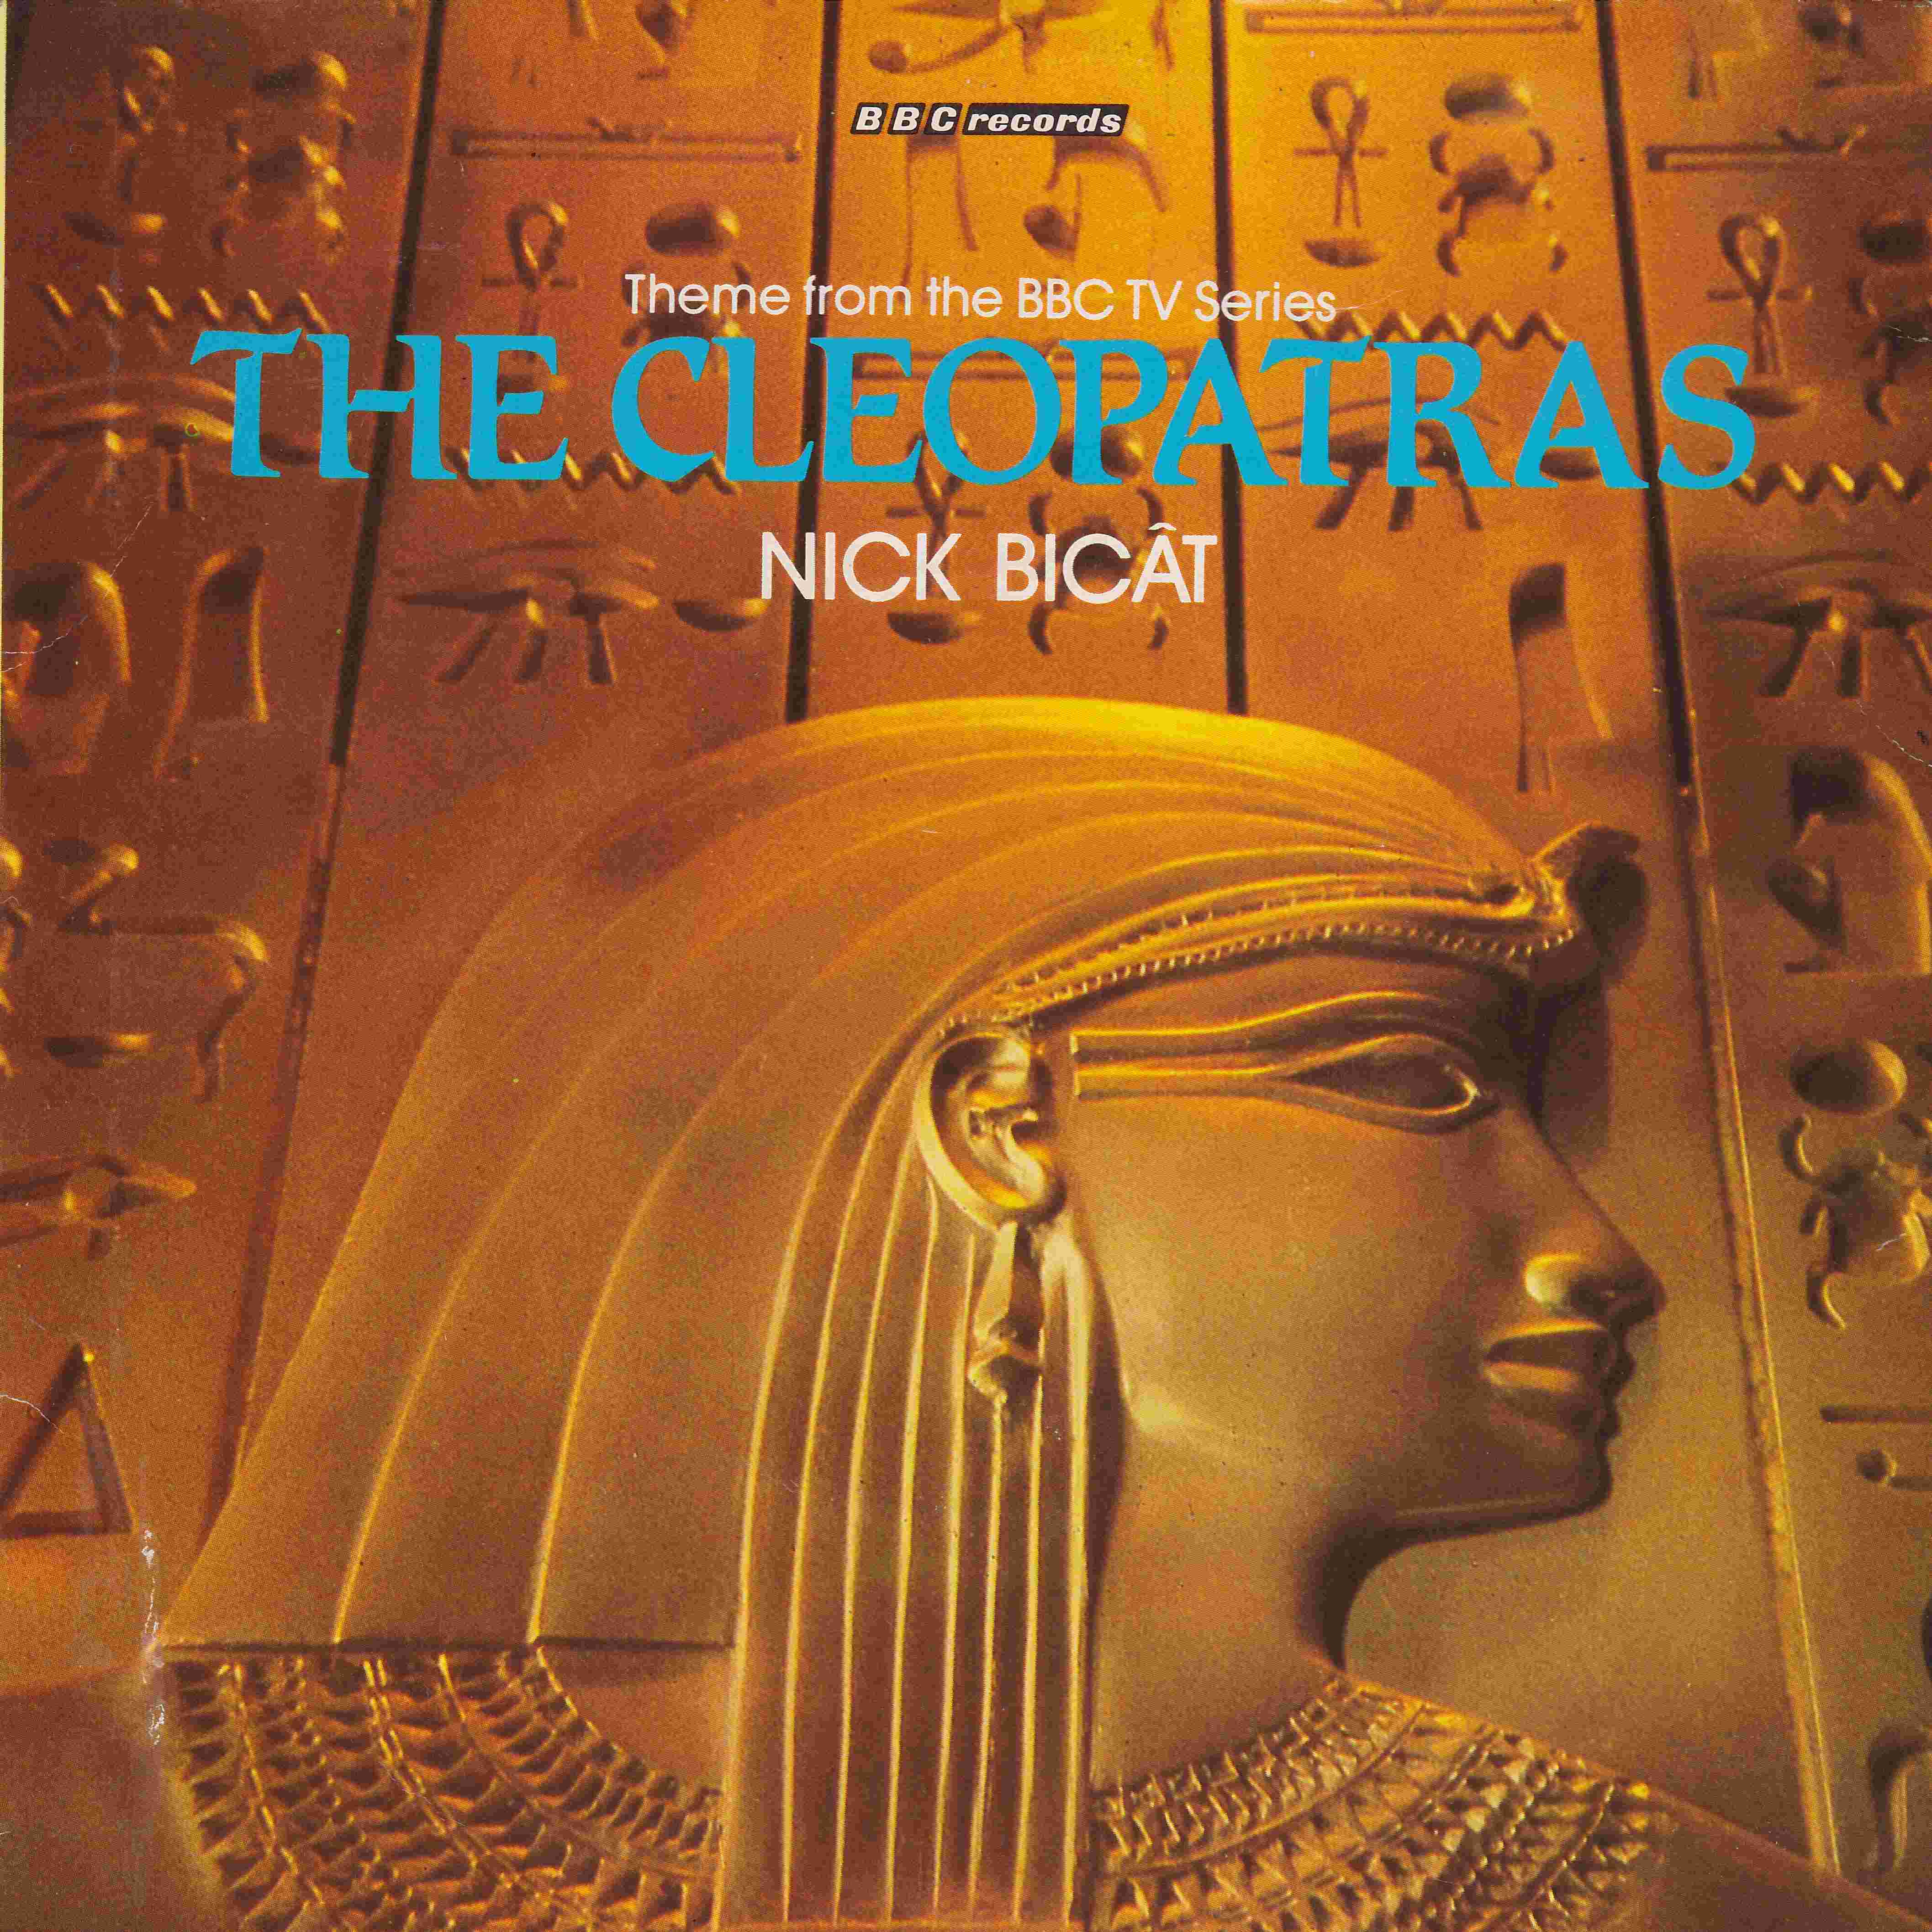 Picture of RESL 128 The Cleopatras by artist Nick Bicat from the BBC singles - Records and Tapes library